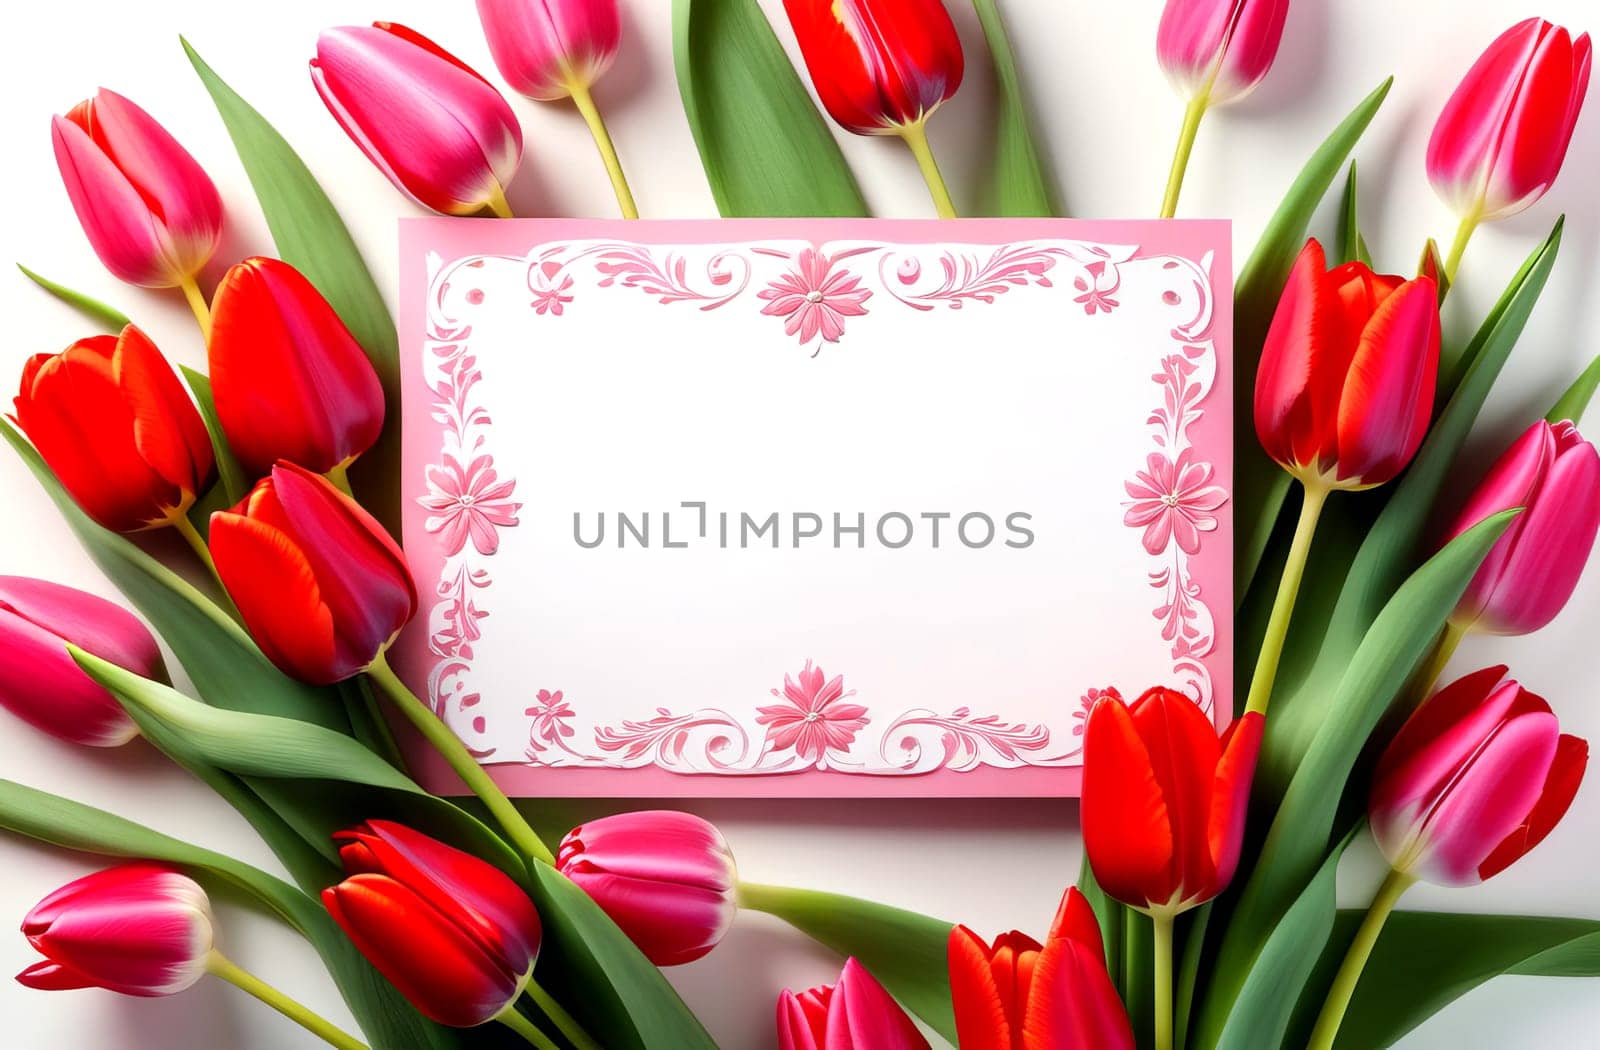 Women's Day card, a frame of pink and red tulips. by OlgaGubskaya